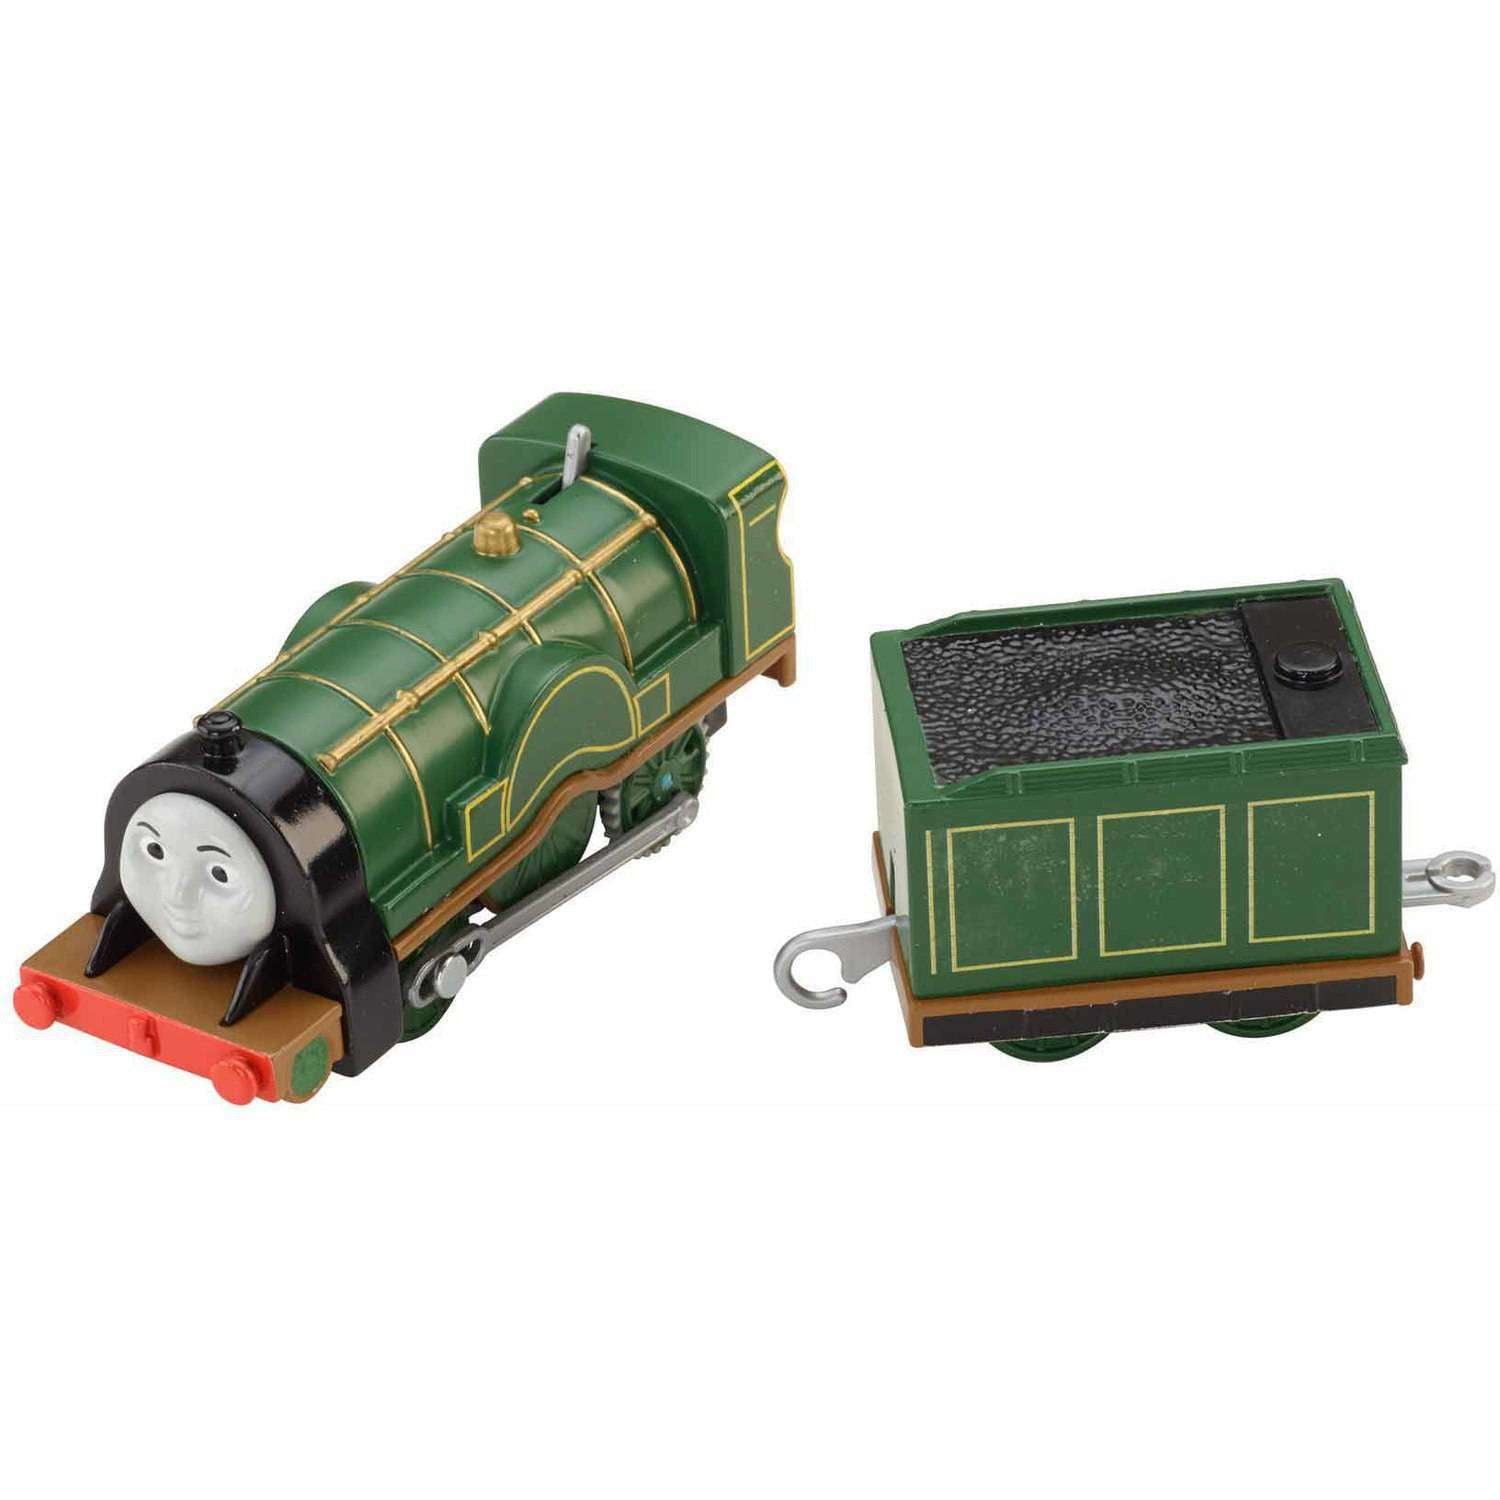 Toy Car Train Thomas and Friends TrackMaster Metallic Motorized Engine Ages 3